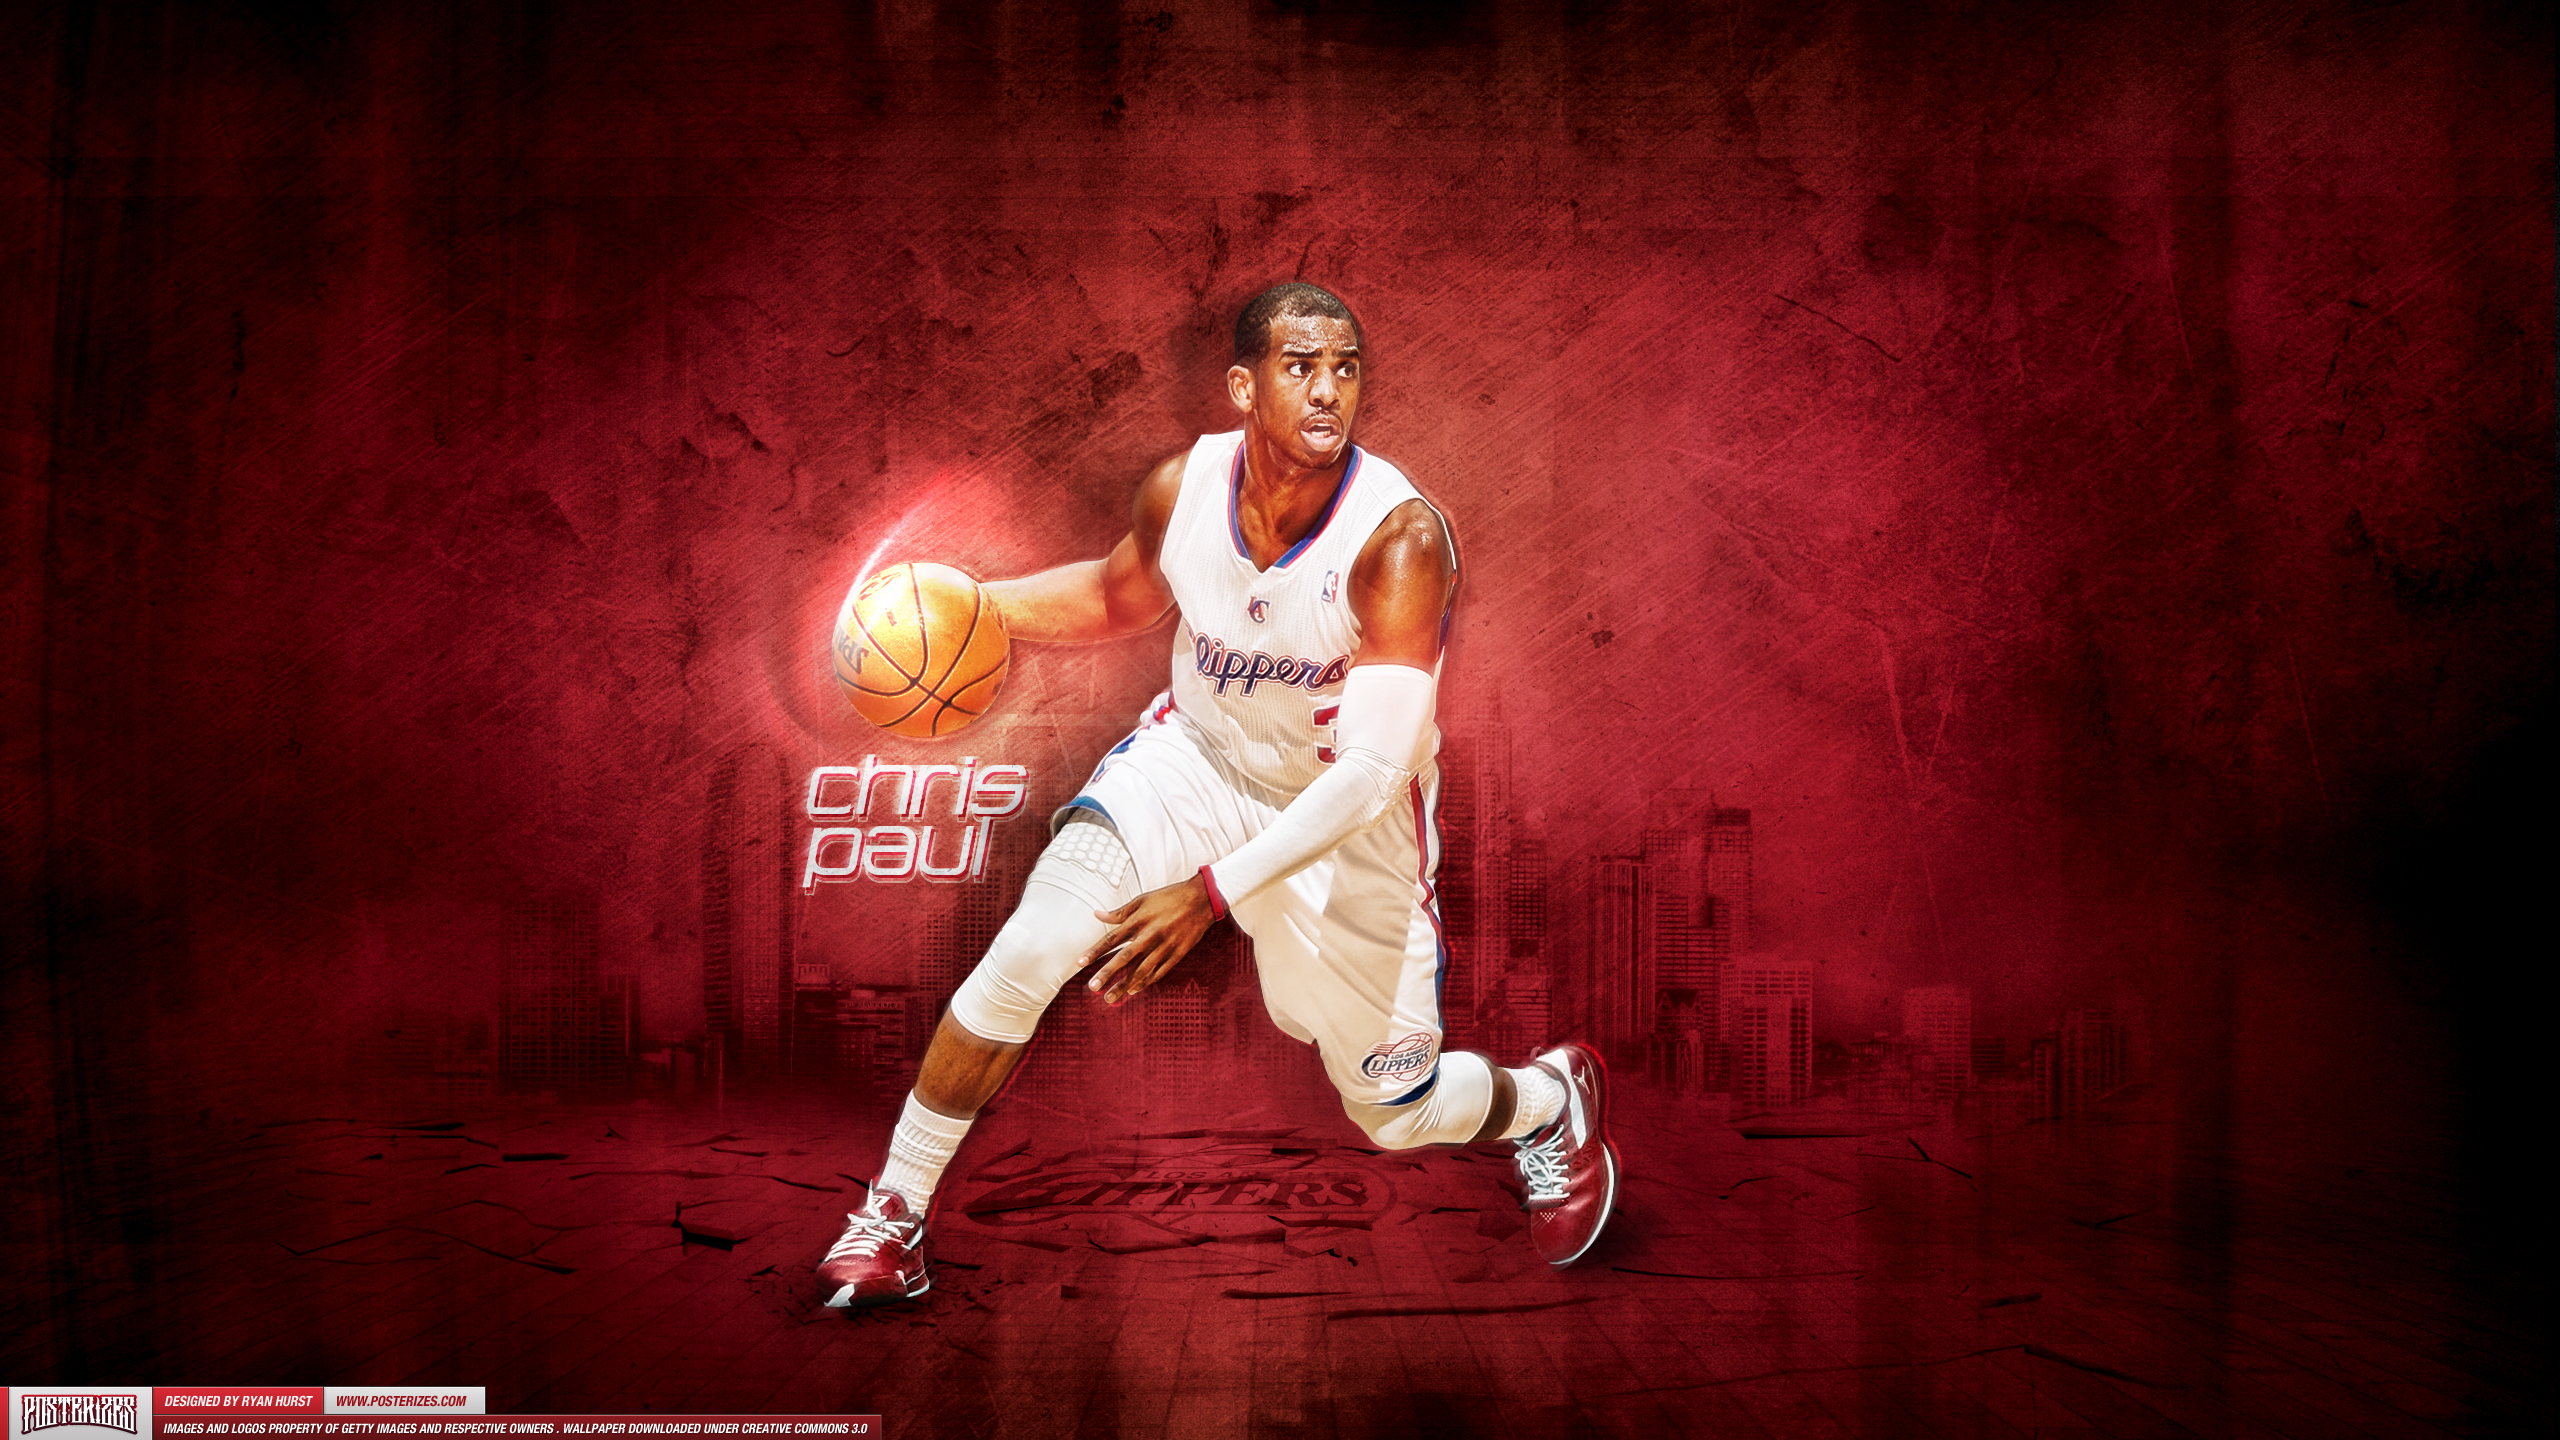 Threat Your Chris Paul Wallpaper From Posterizes Today